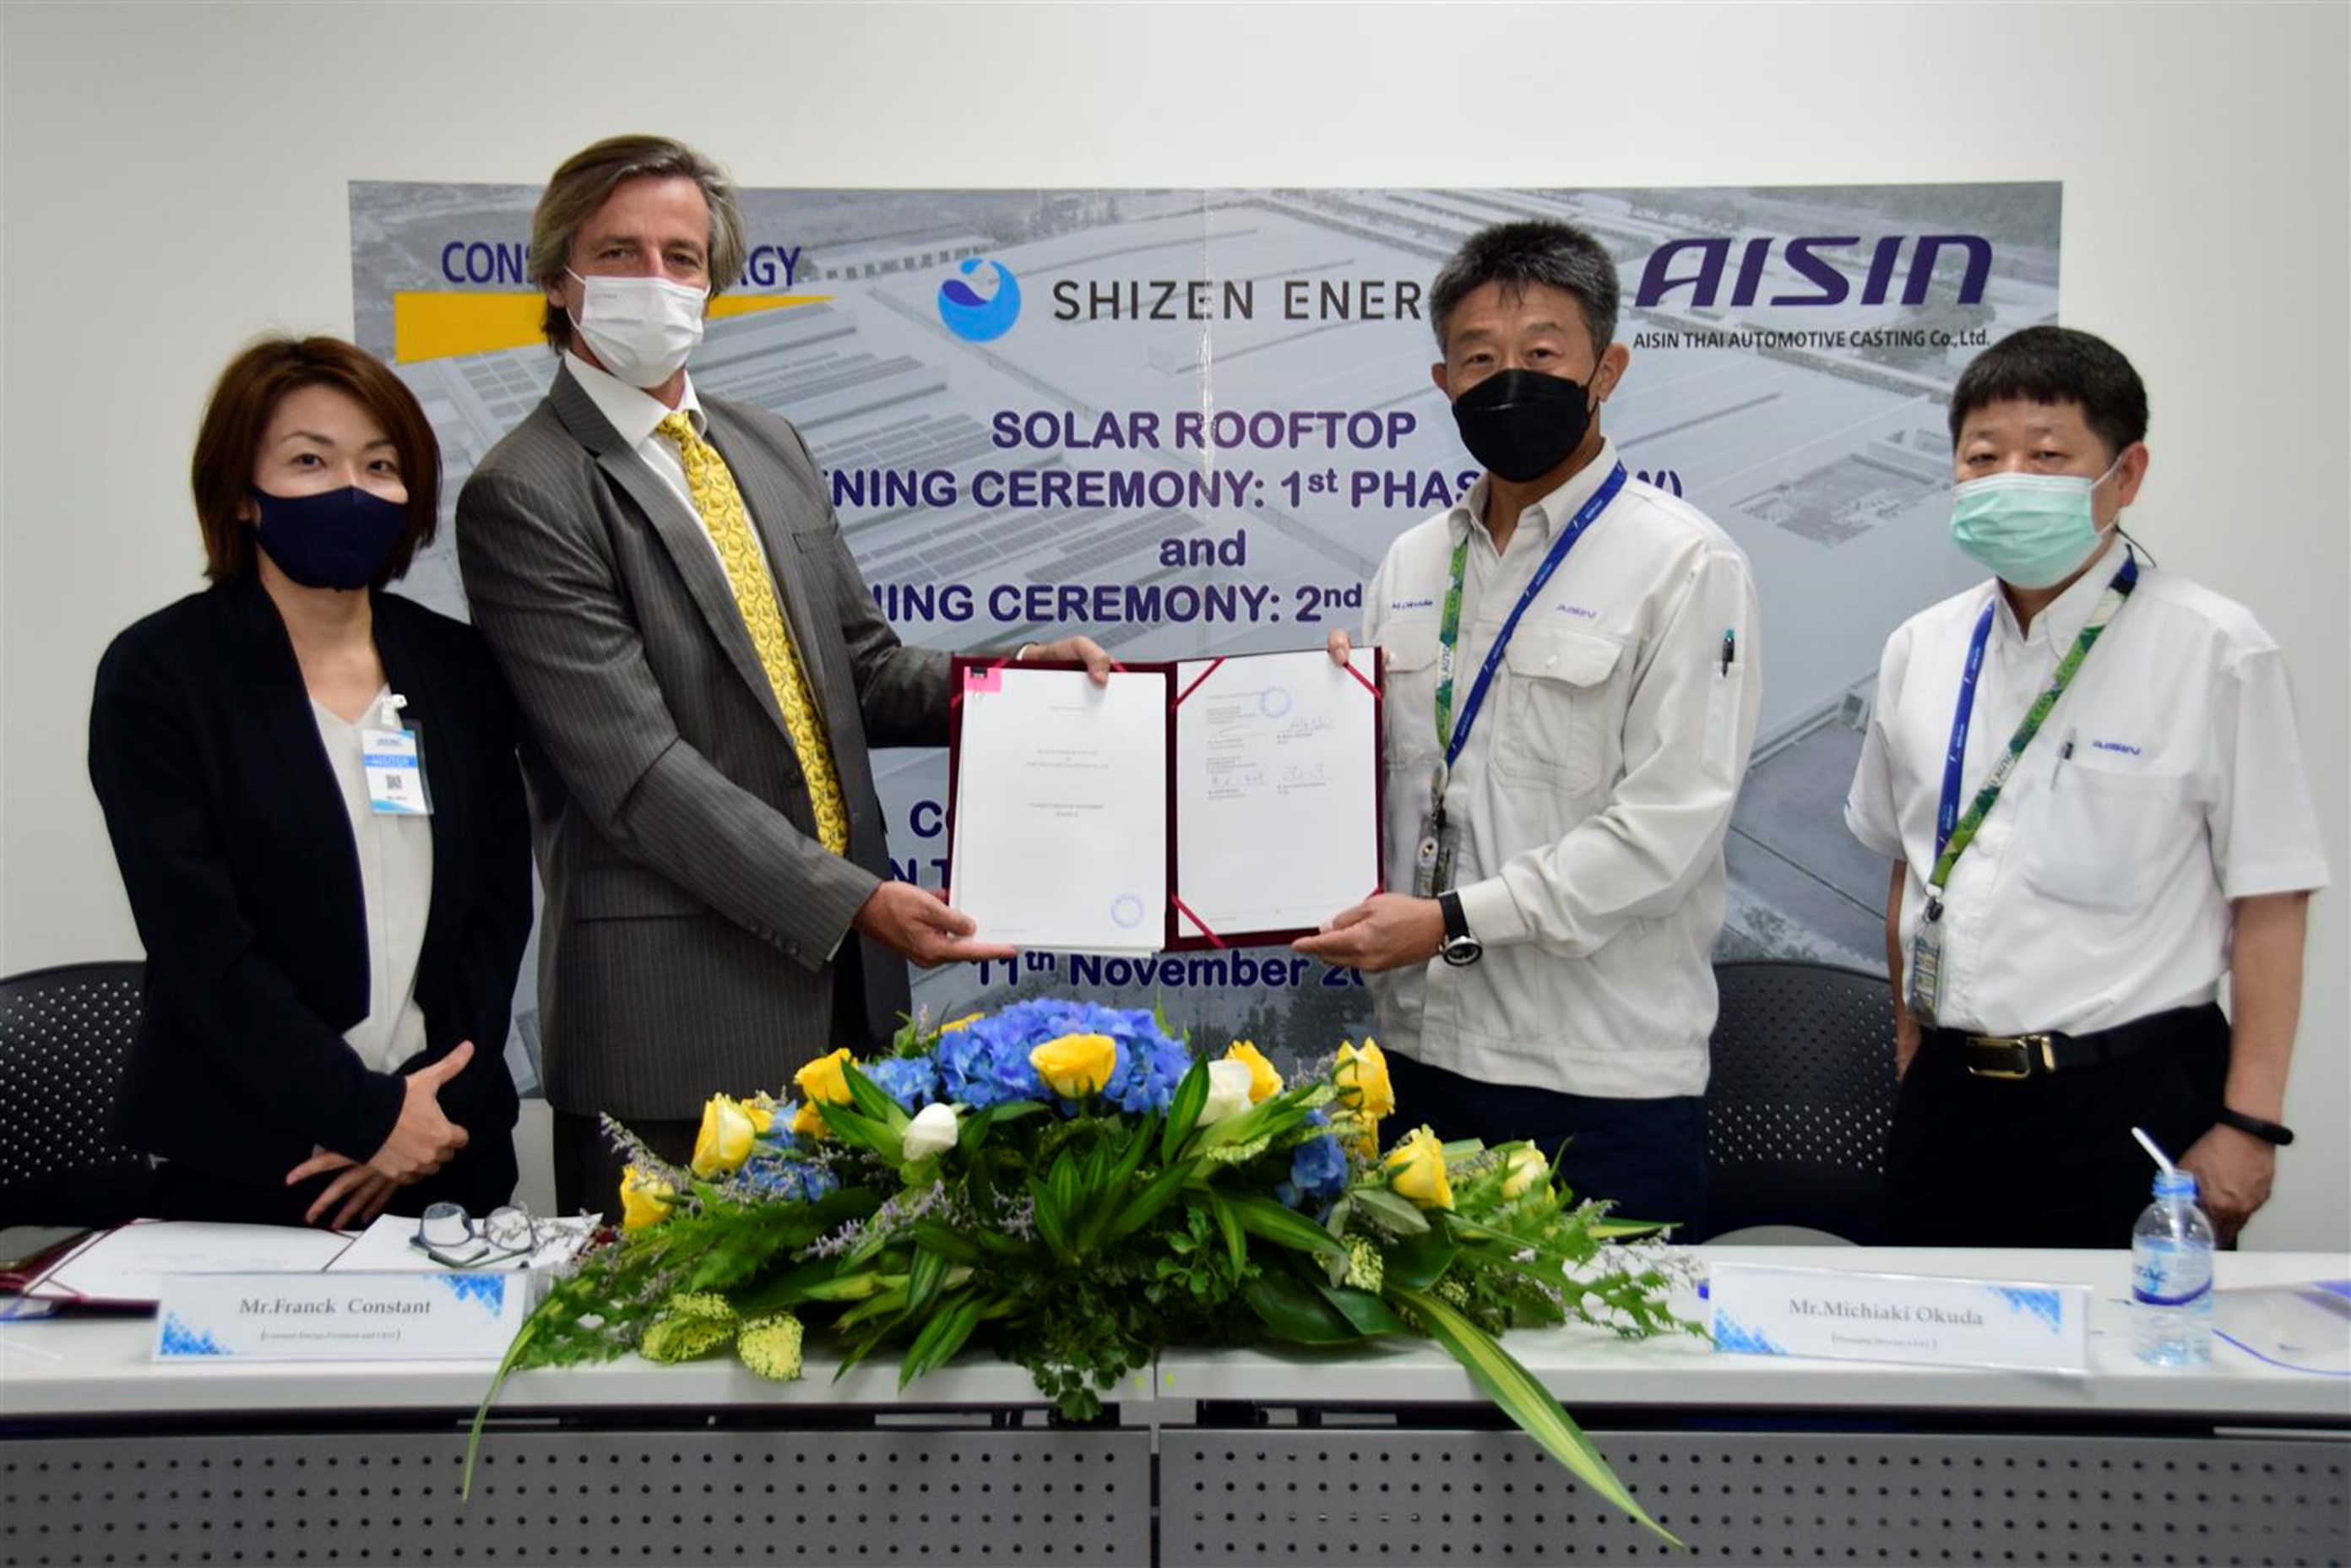 Aisin Thai Automotive Casting (Aisin Group) and Shizen Energy / Constant Energy execute a Corporate PPA to expand its current solar rooftop operations to 3.7MW